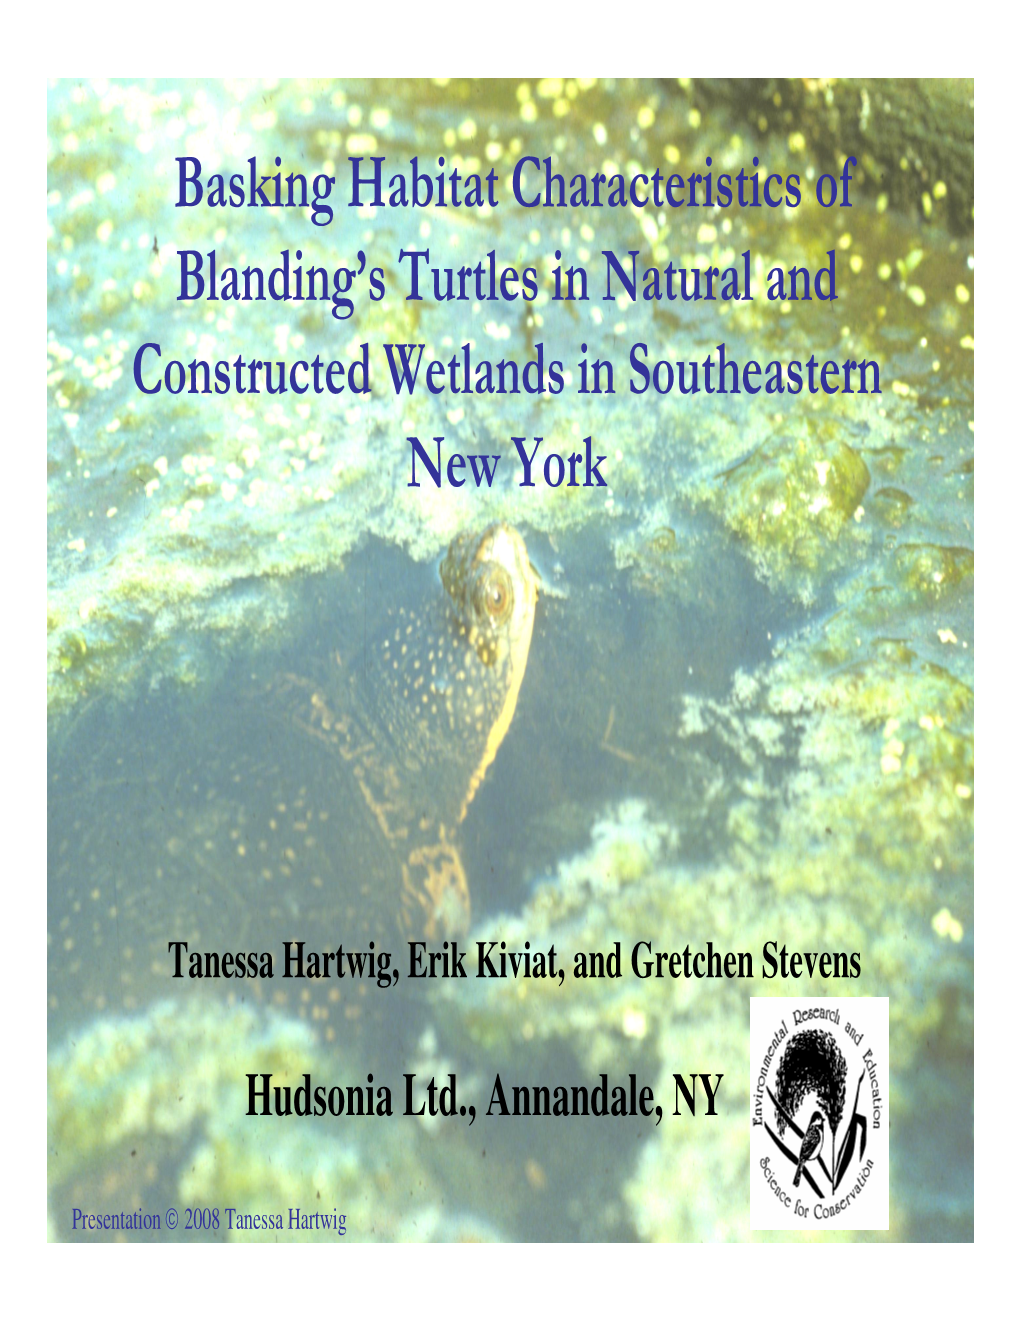 Basking Habitat Characteristics of Blanding's Turtles in Natural And